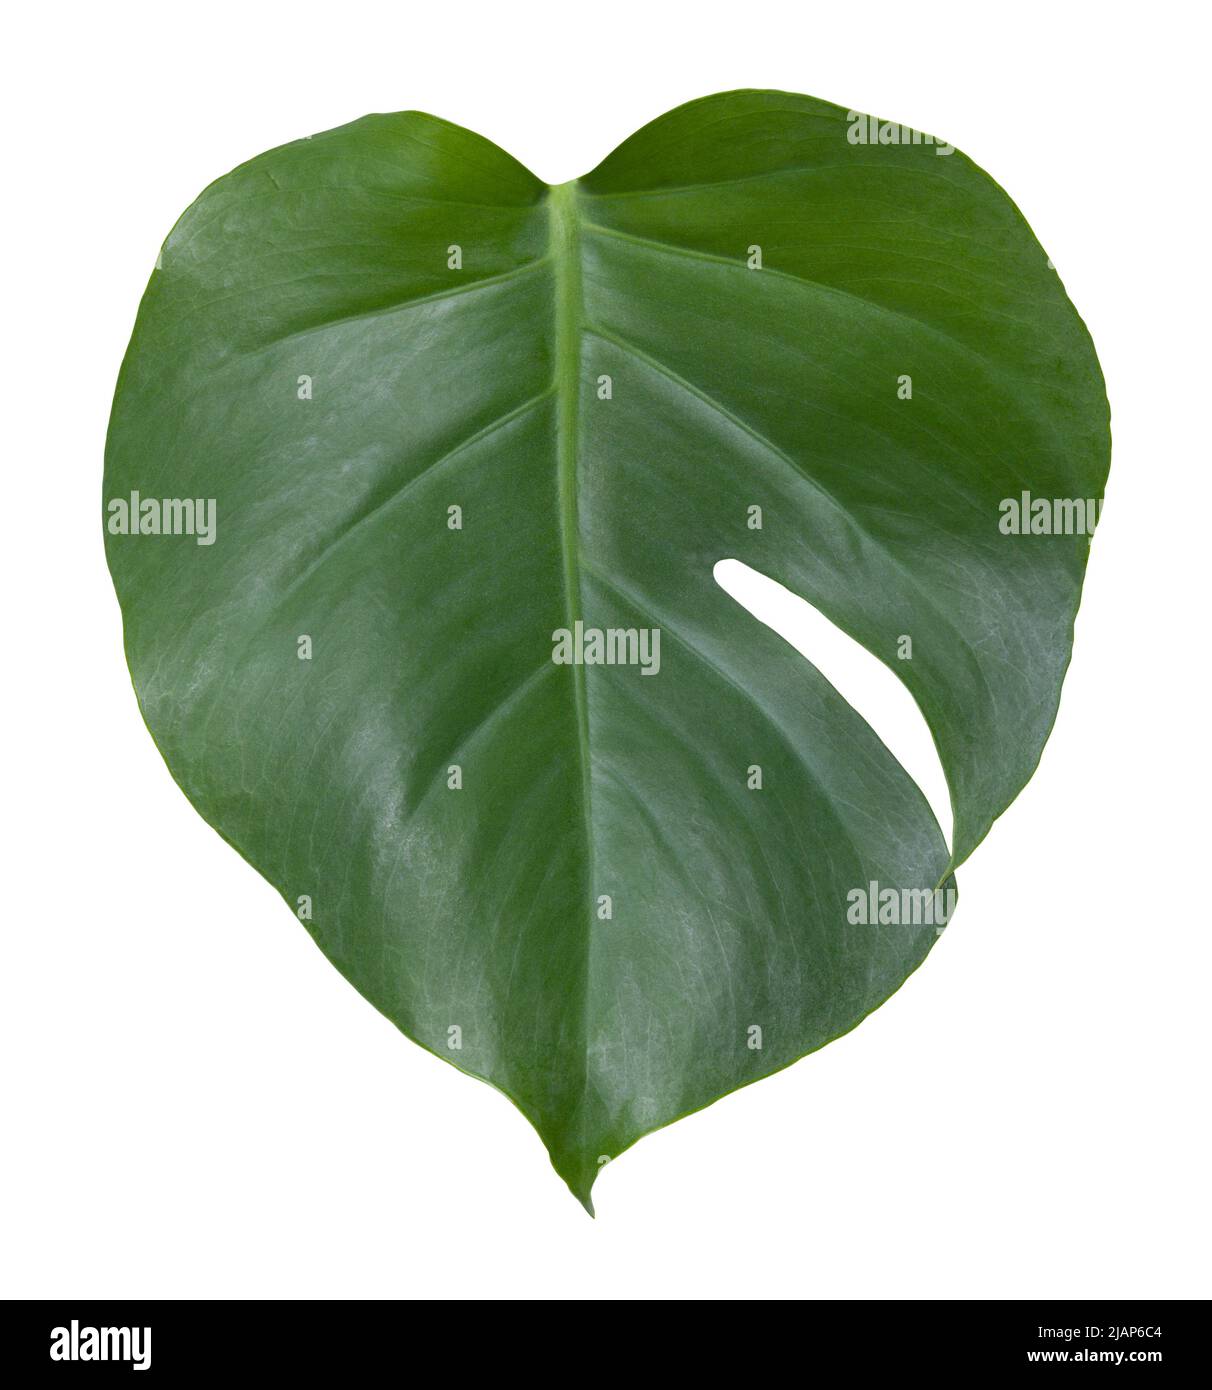 Green Tropical Leaf Cut Out on White. Stock Photo